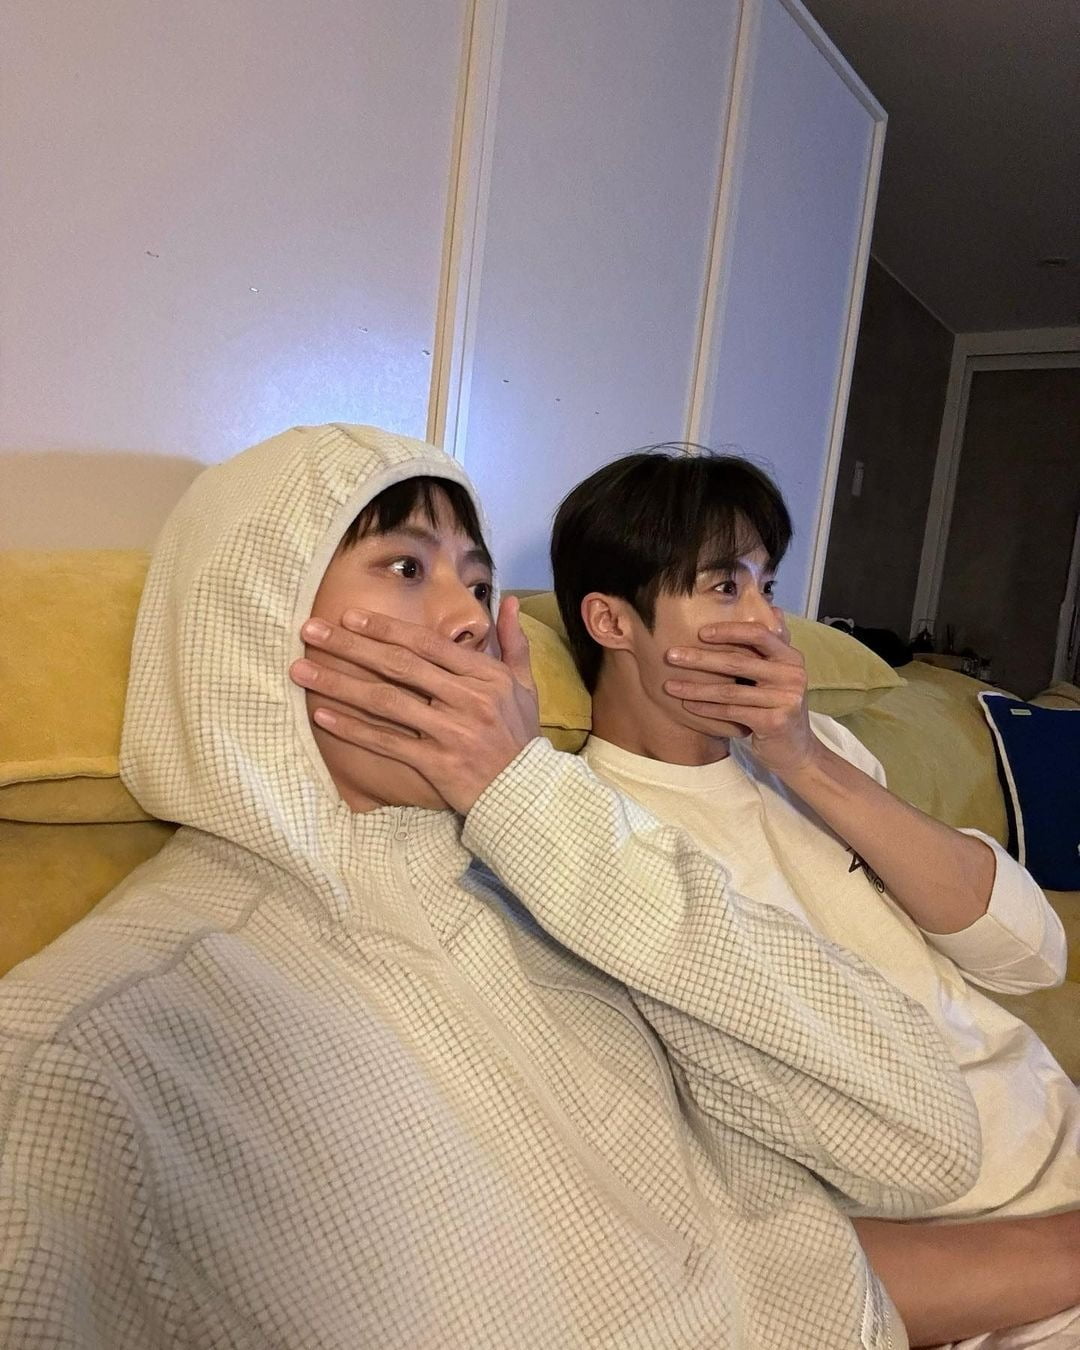 Byeon Woo-seok and Joo Woo-jae reveal a pose with their mouths covered